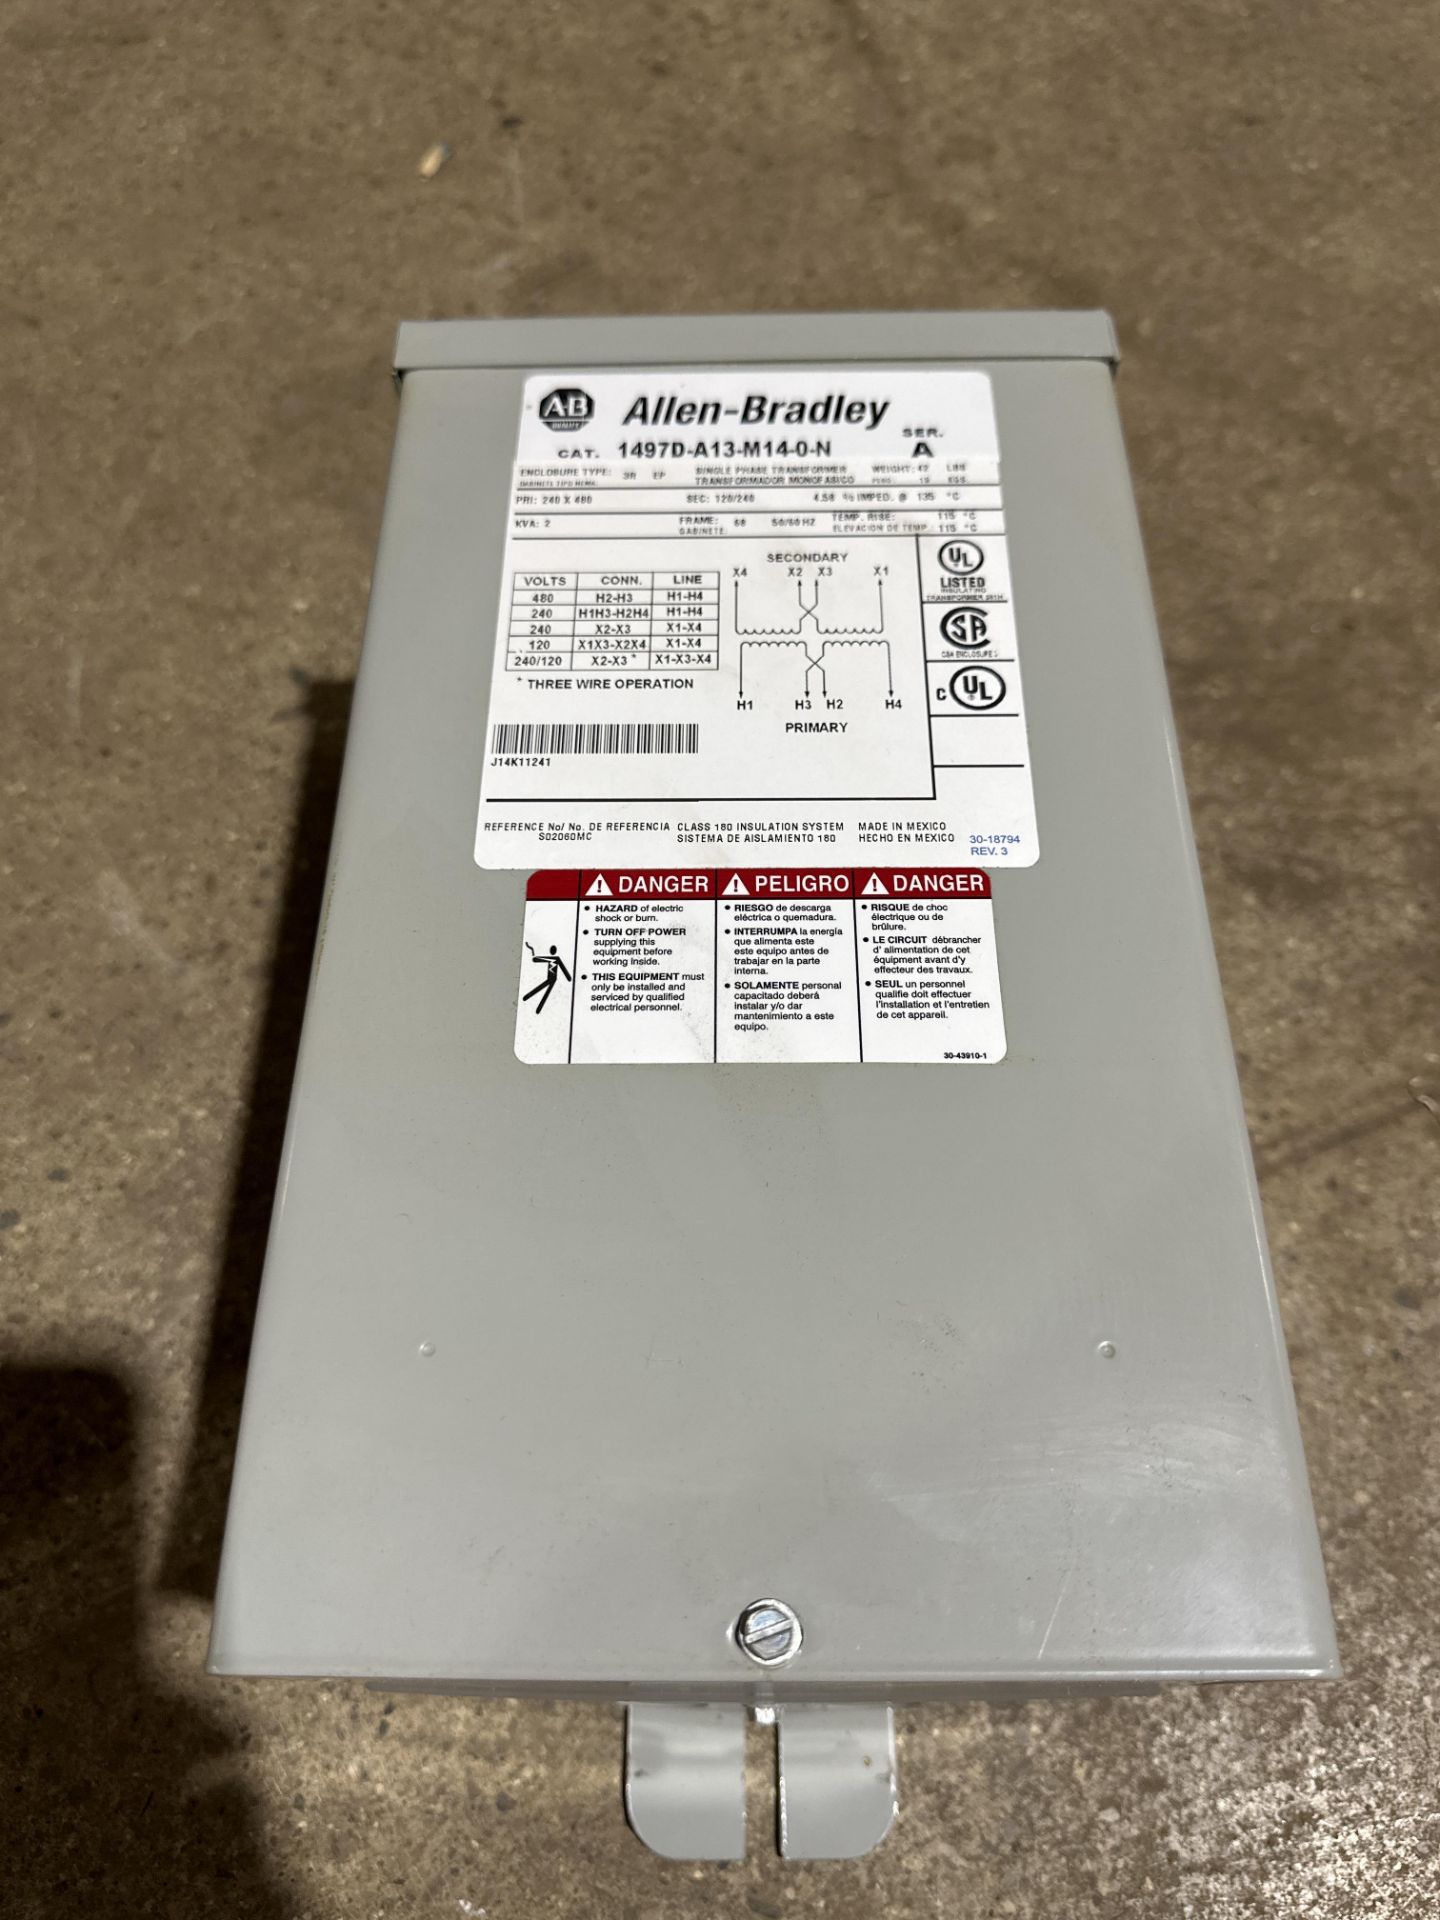 NEW IN BOX ALLEN BRADLEY 1479D-A13-M14-0-N TRANSFORMER 240/480 PRIMARY 120/240 SECONDARY 2 KVA - Image 4 of 6